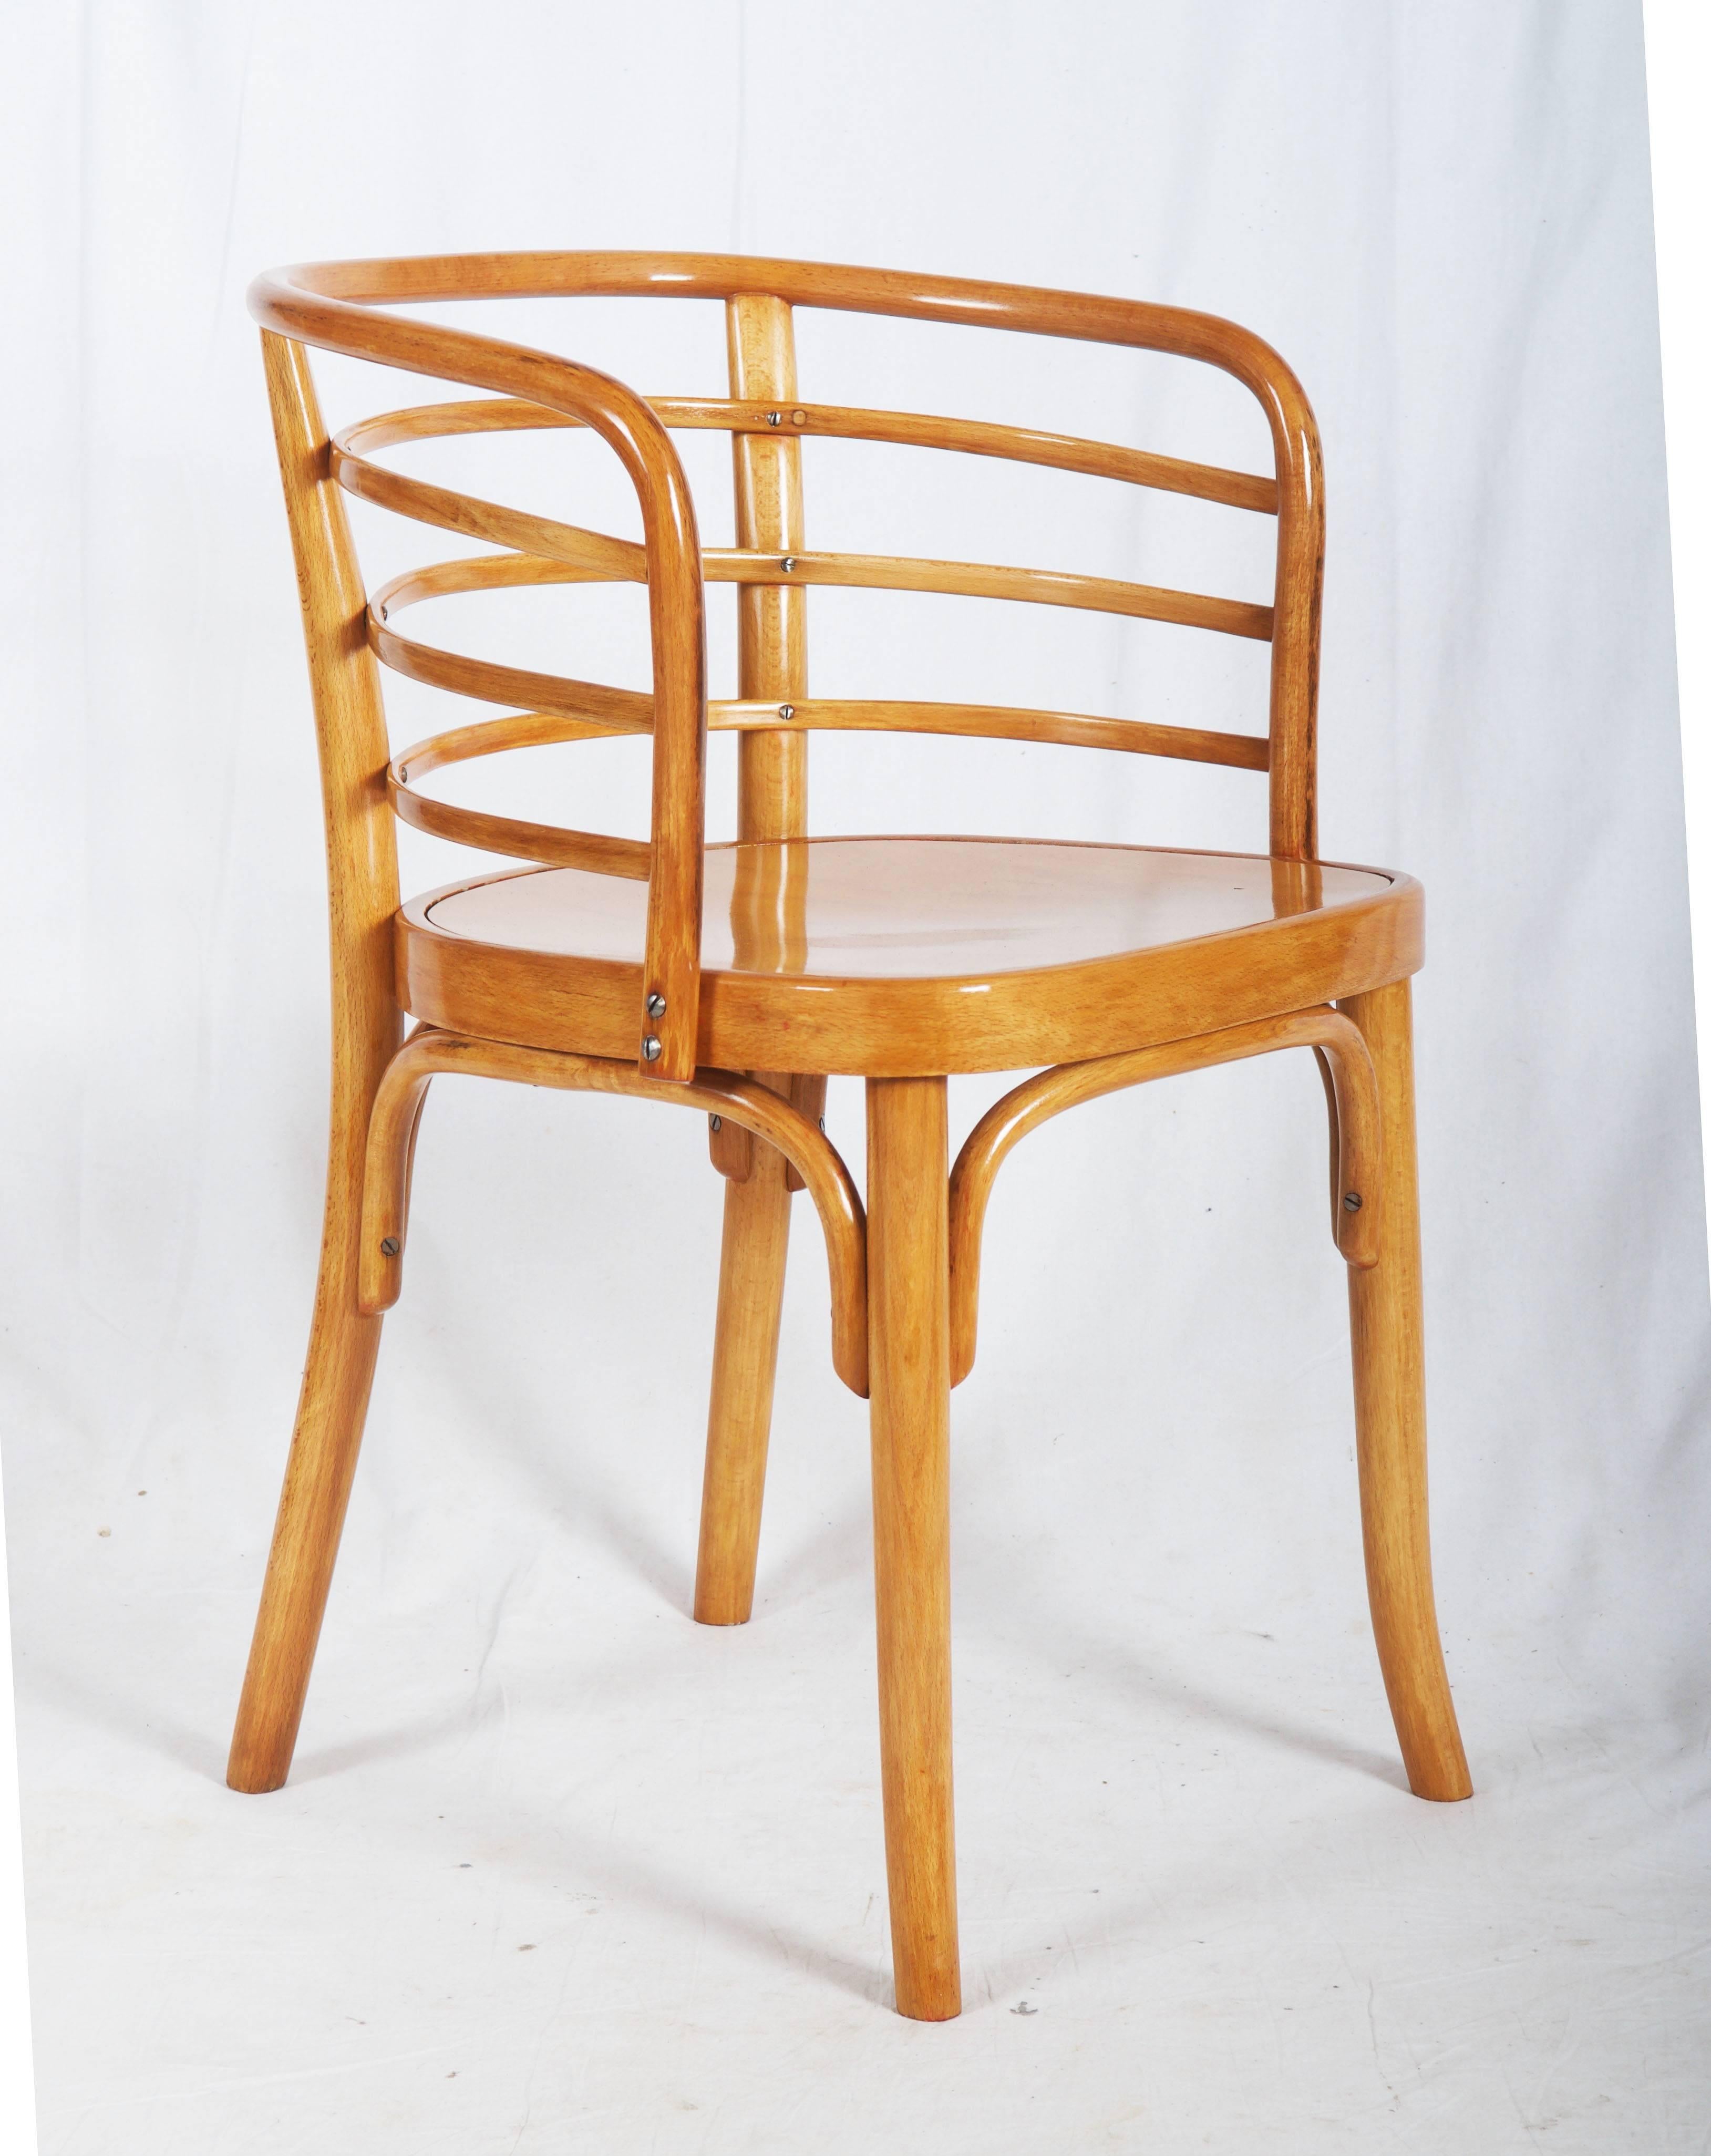 up to 6 pcs availabe, designed in the 1930 by Josef Frank for Thonet.
Signed Thonet on the frame.